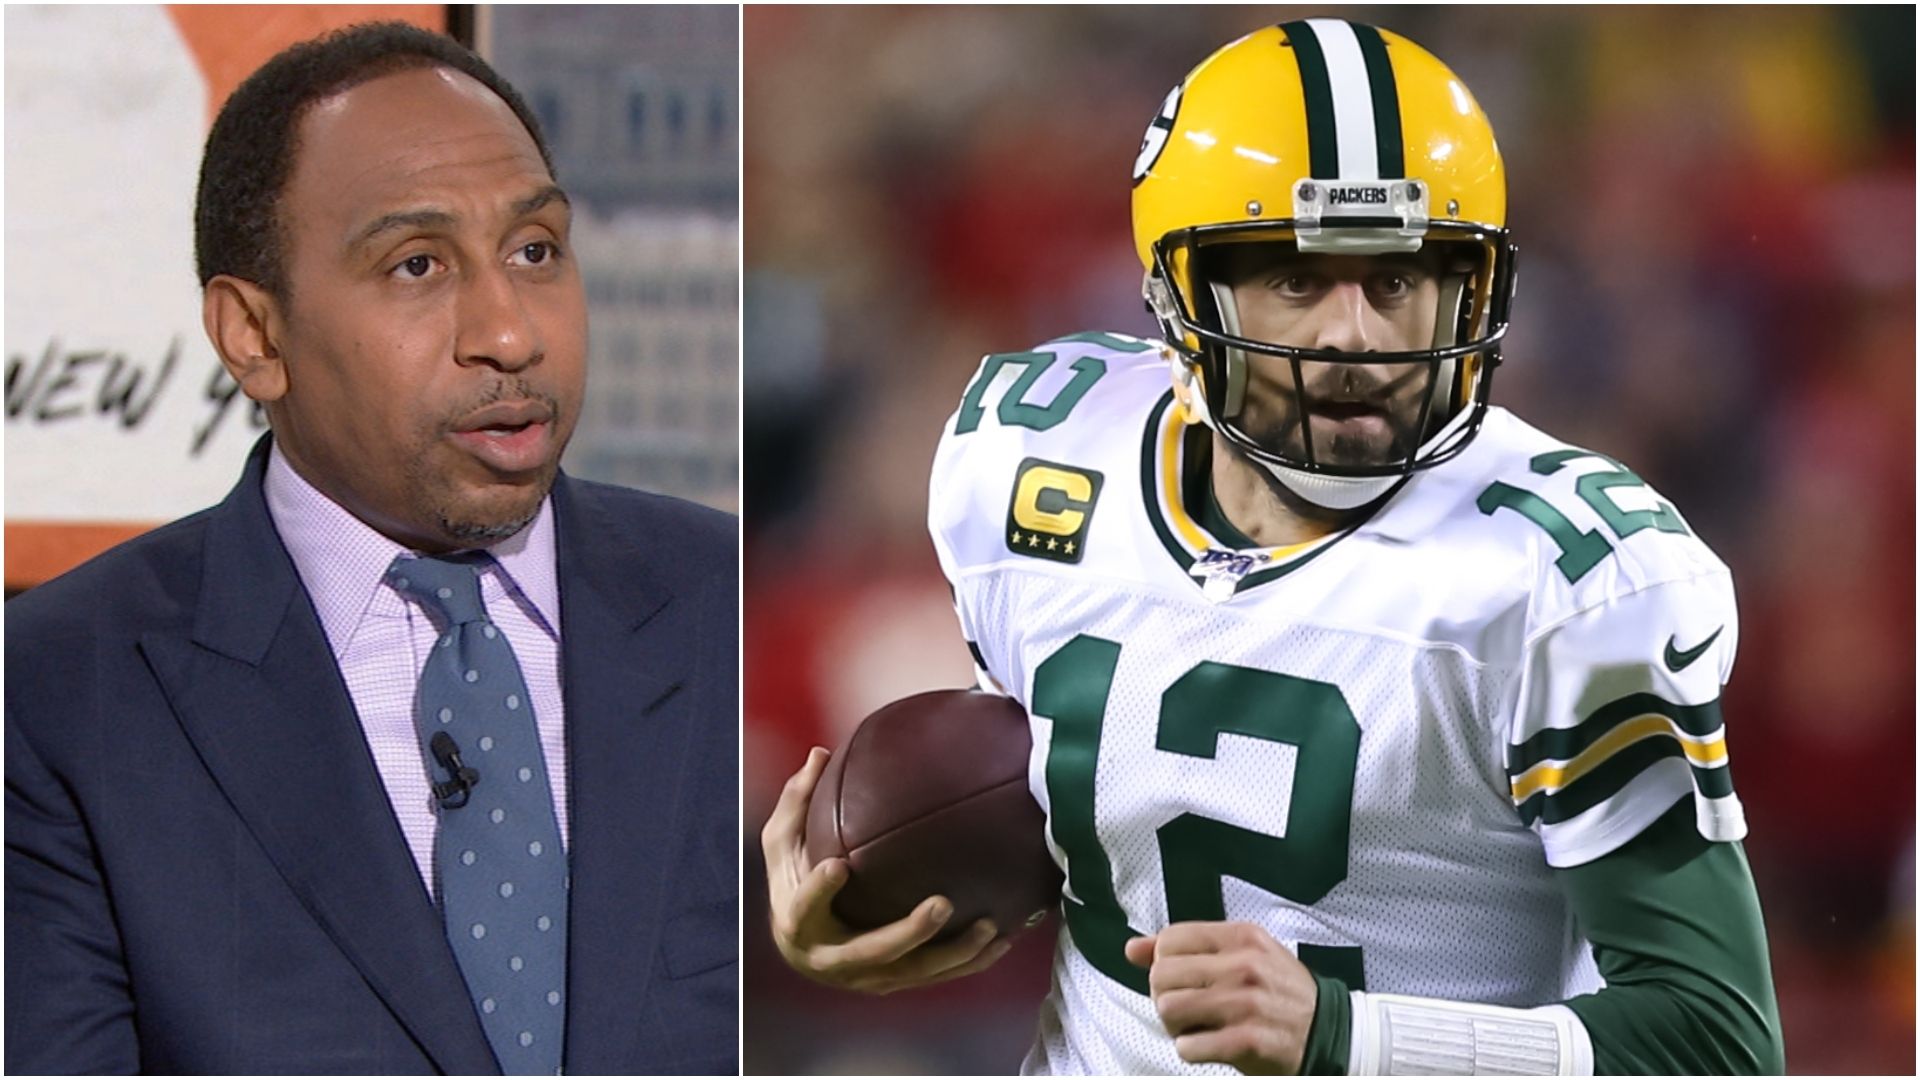 Stephen A.: Rodgers not the MVP, yet - ESPN Video